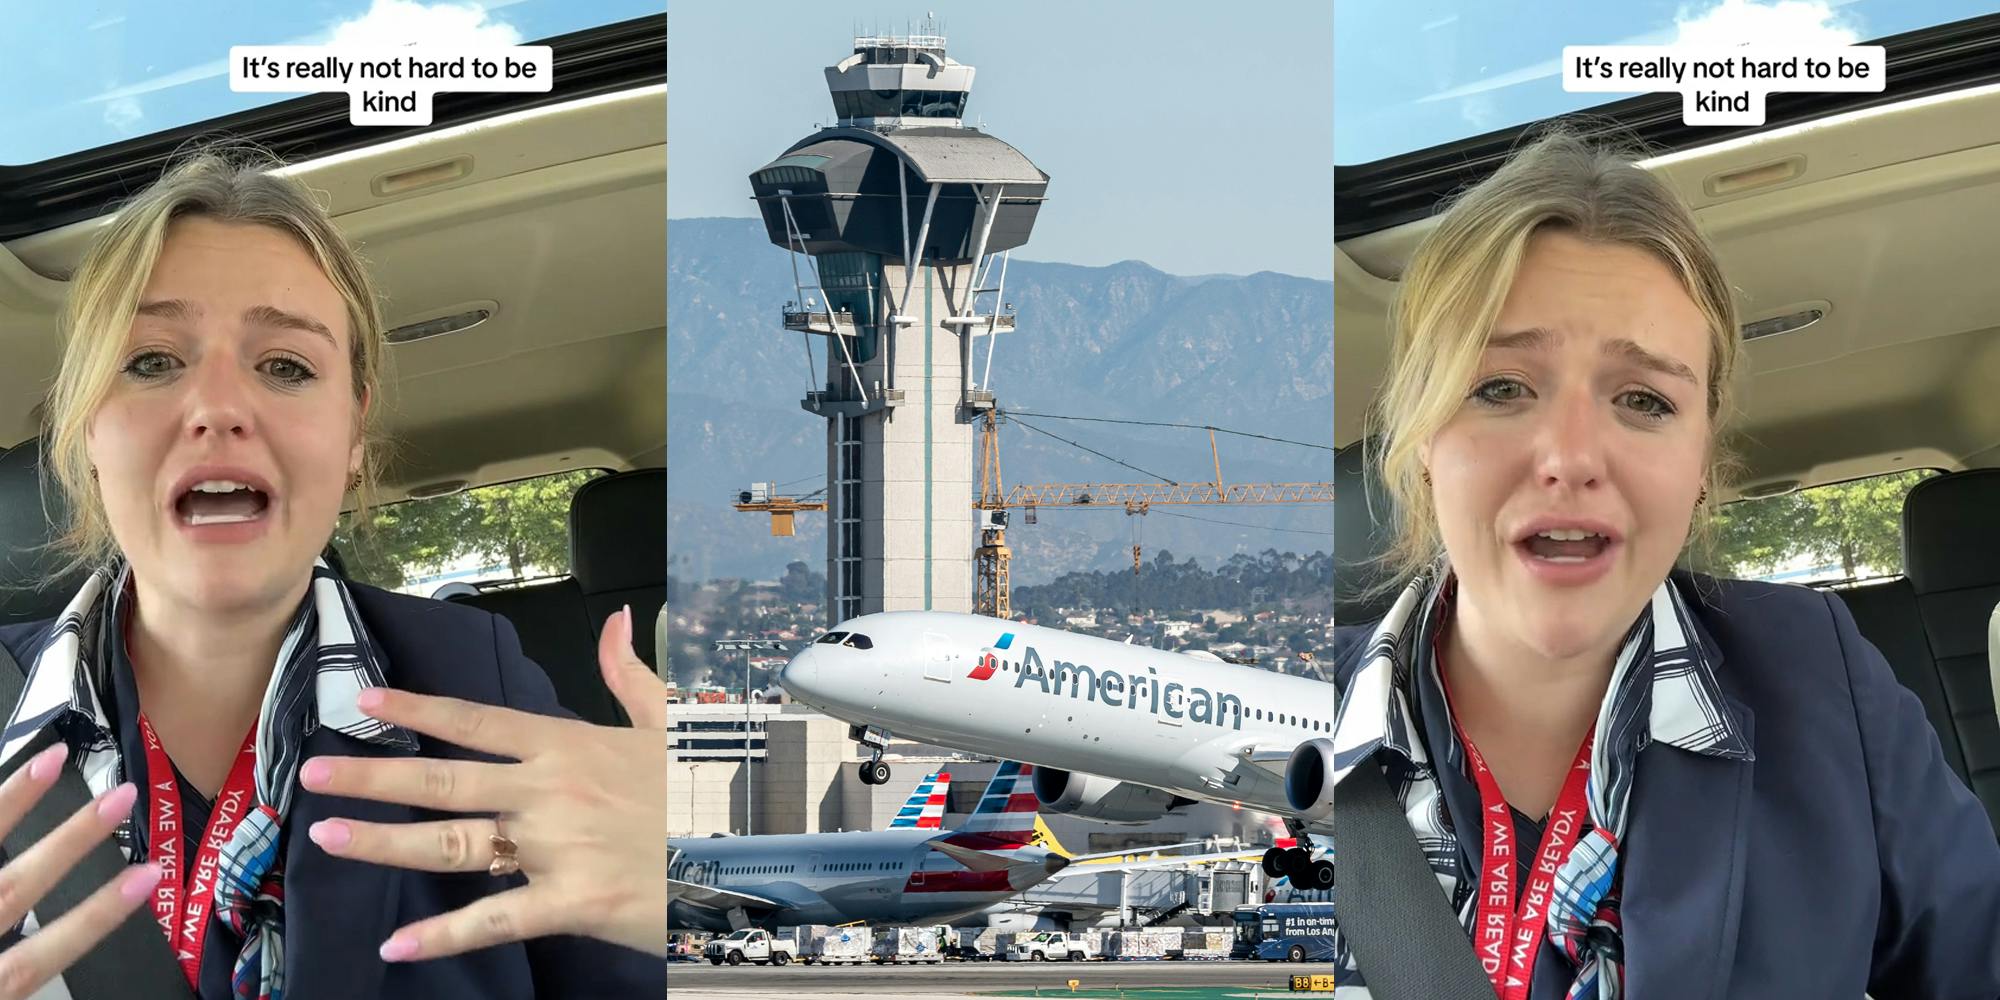 American Airlines worker speaking in car with caption "It's really not hard to be kind" (l) American Airlines plane in runway (c) American Airlines worker speaking in car with caption "It's really not hard to be kind" (r)